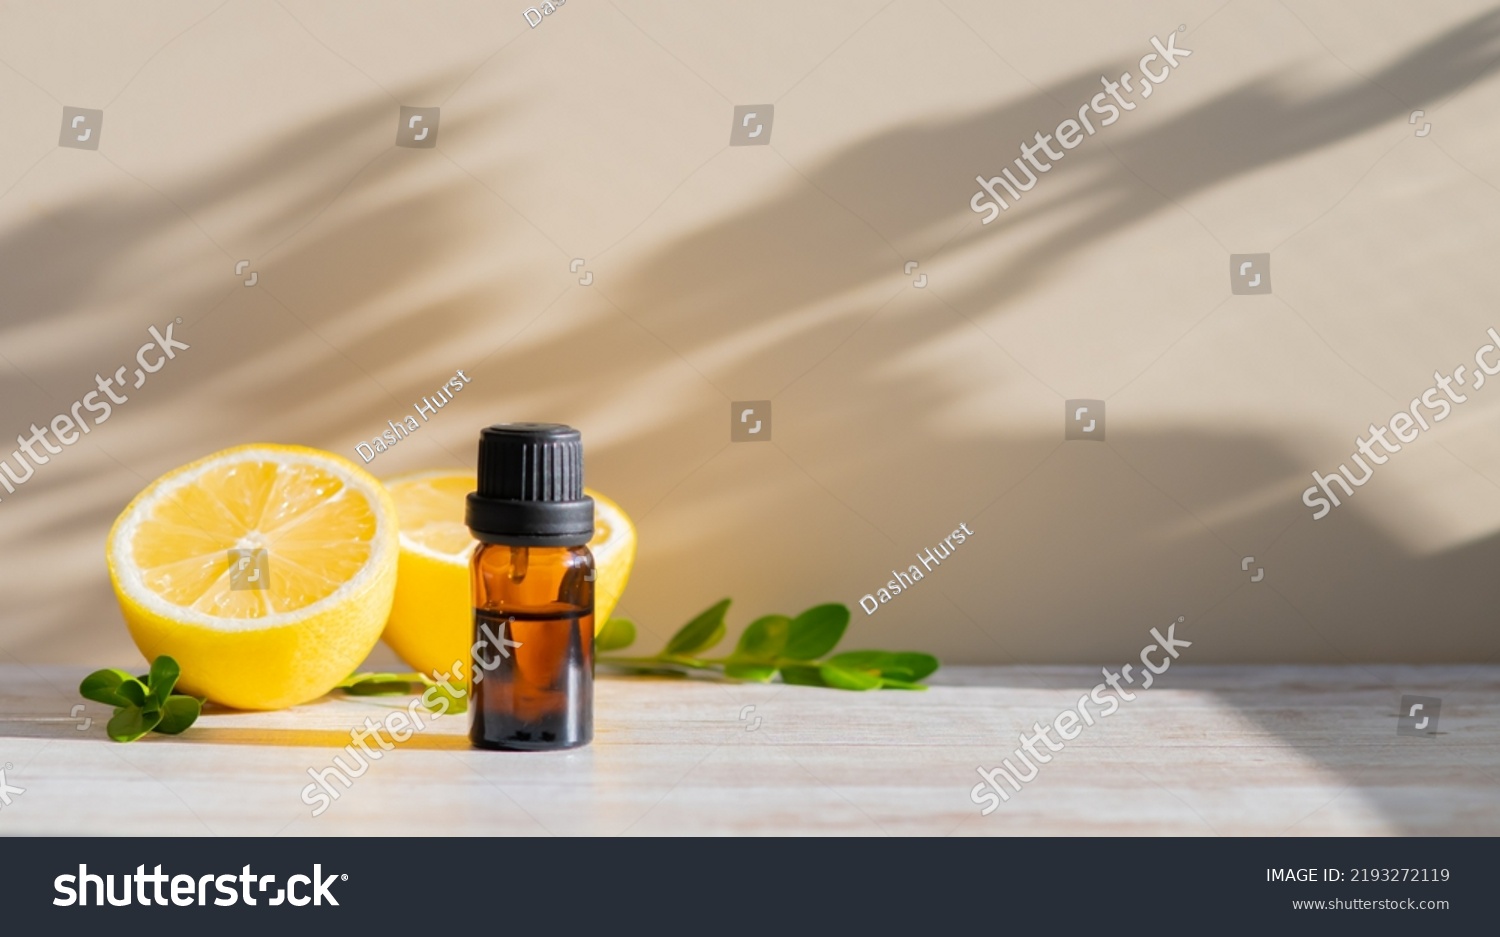 Essential oil in brown bottle and cut lemon on a background #2193272119